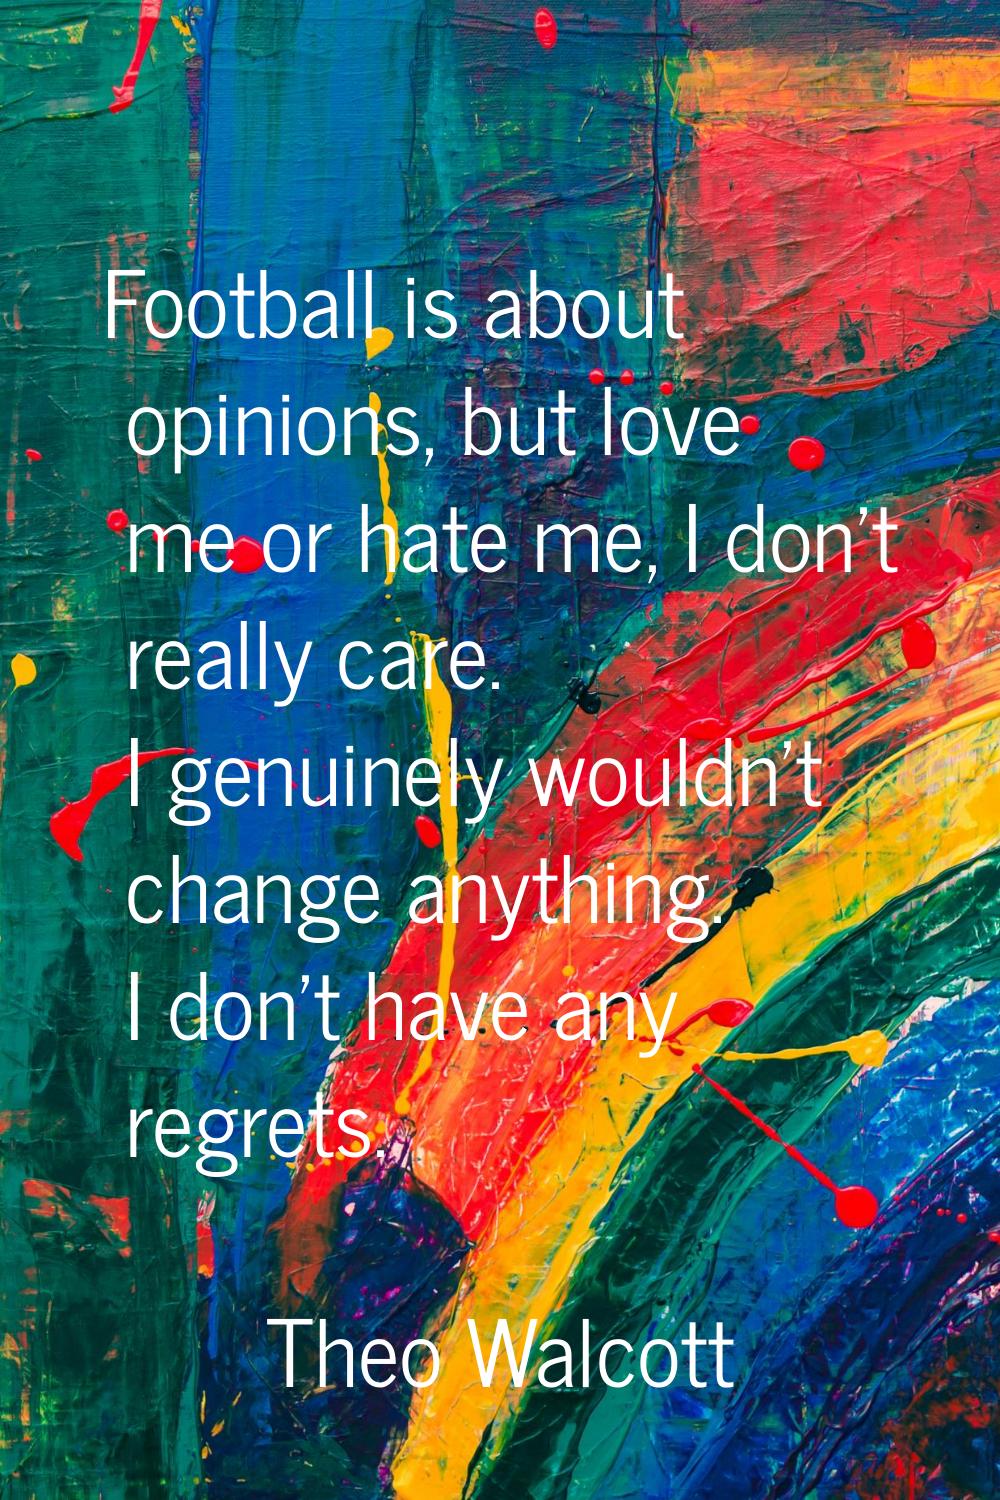 Football is about opinions, but love me or hate me, I don't really care. I genuinely wouldn't chang